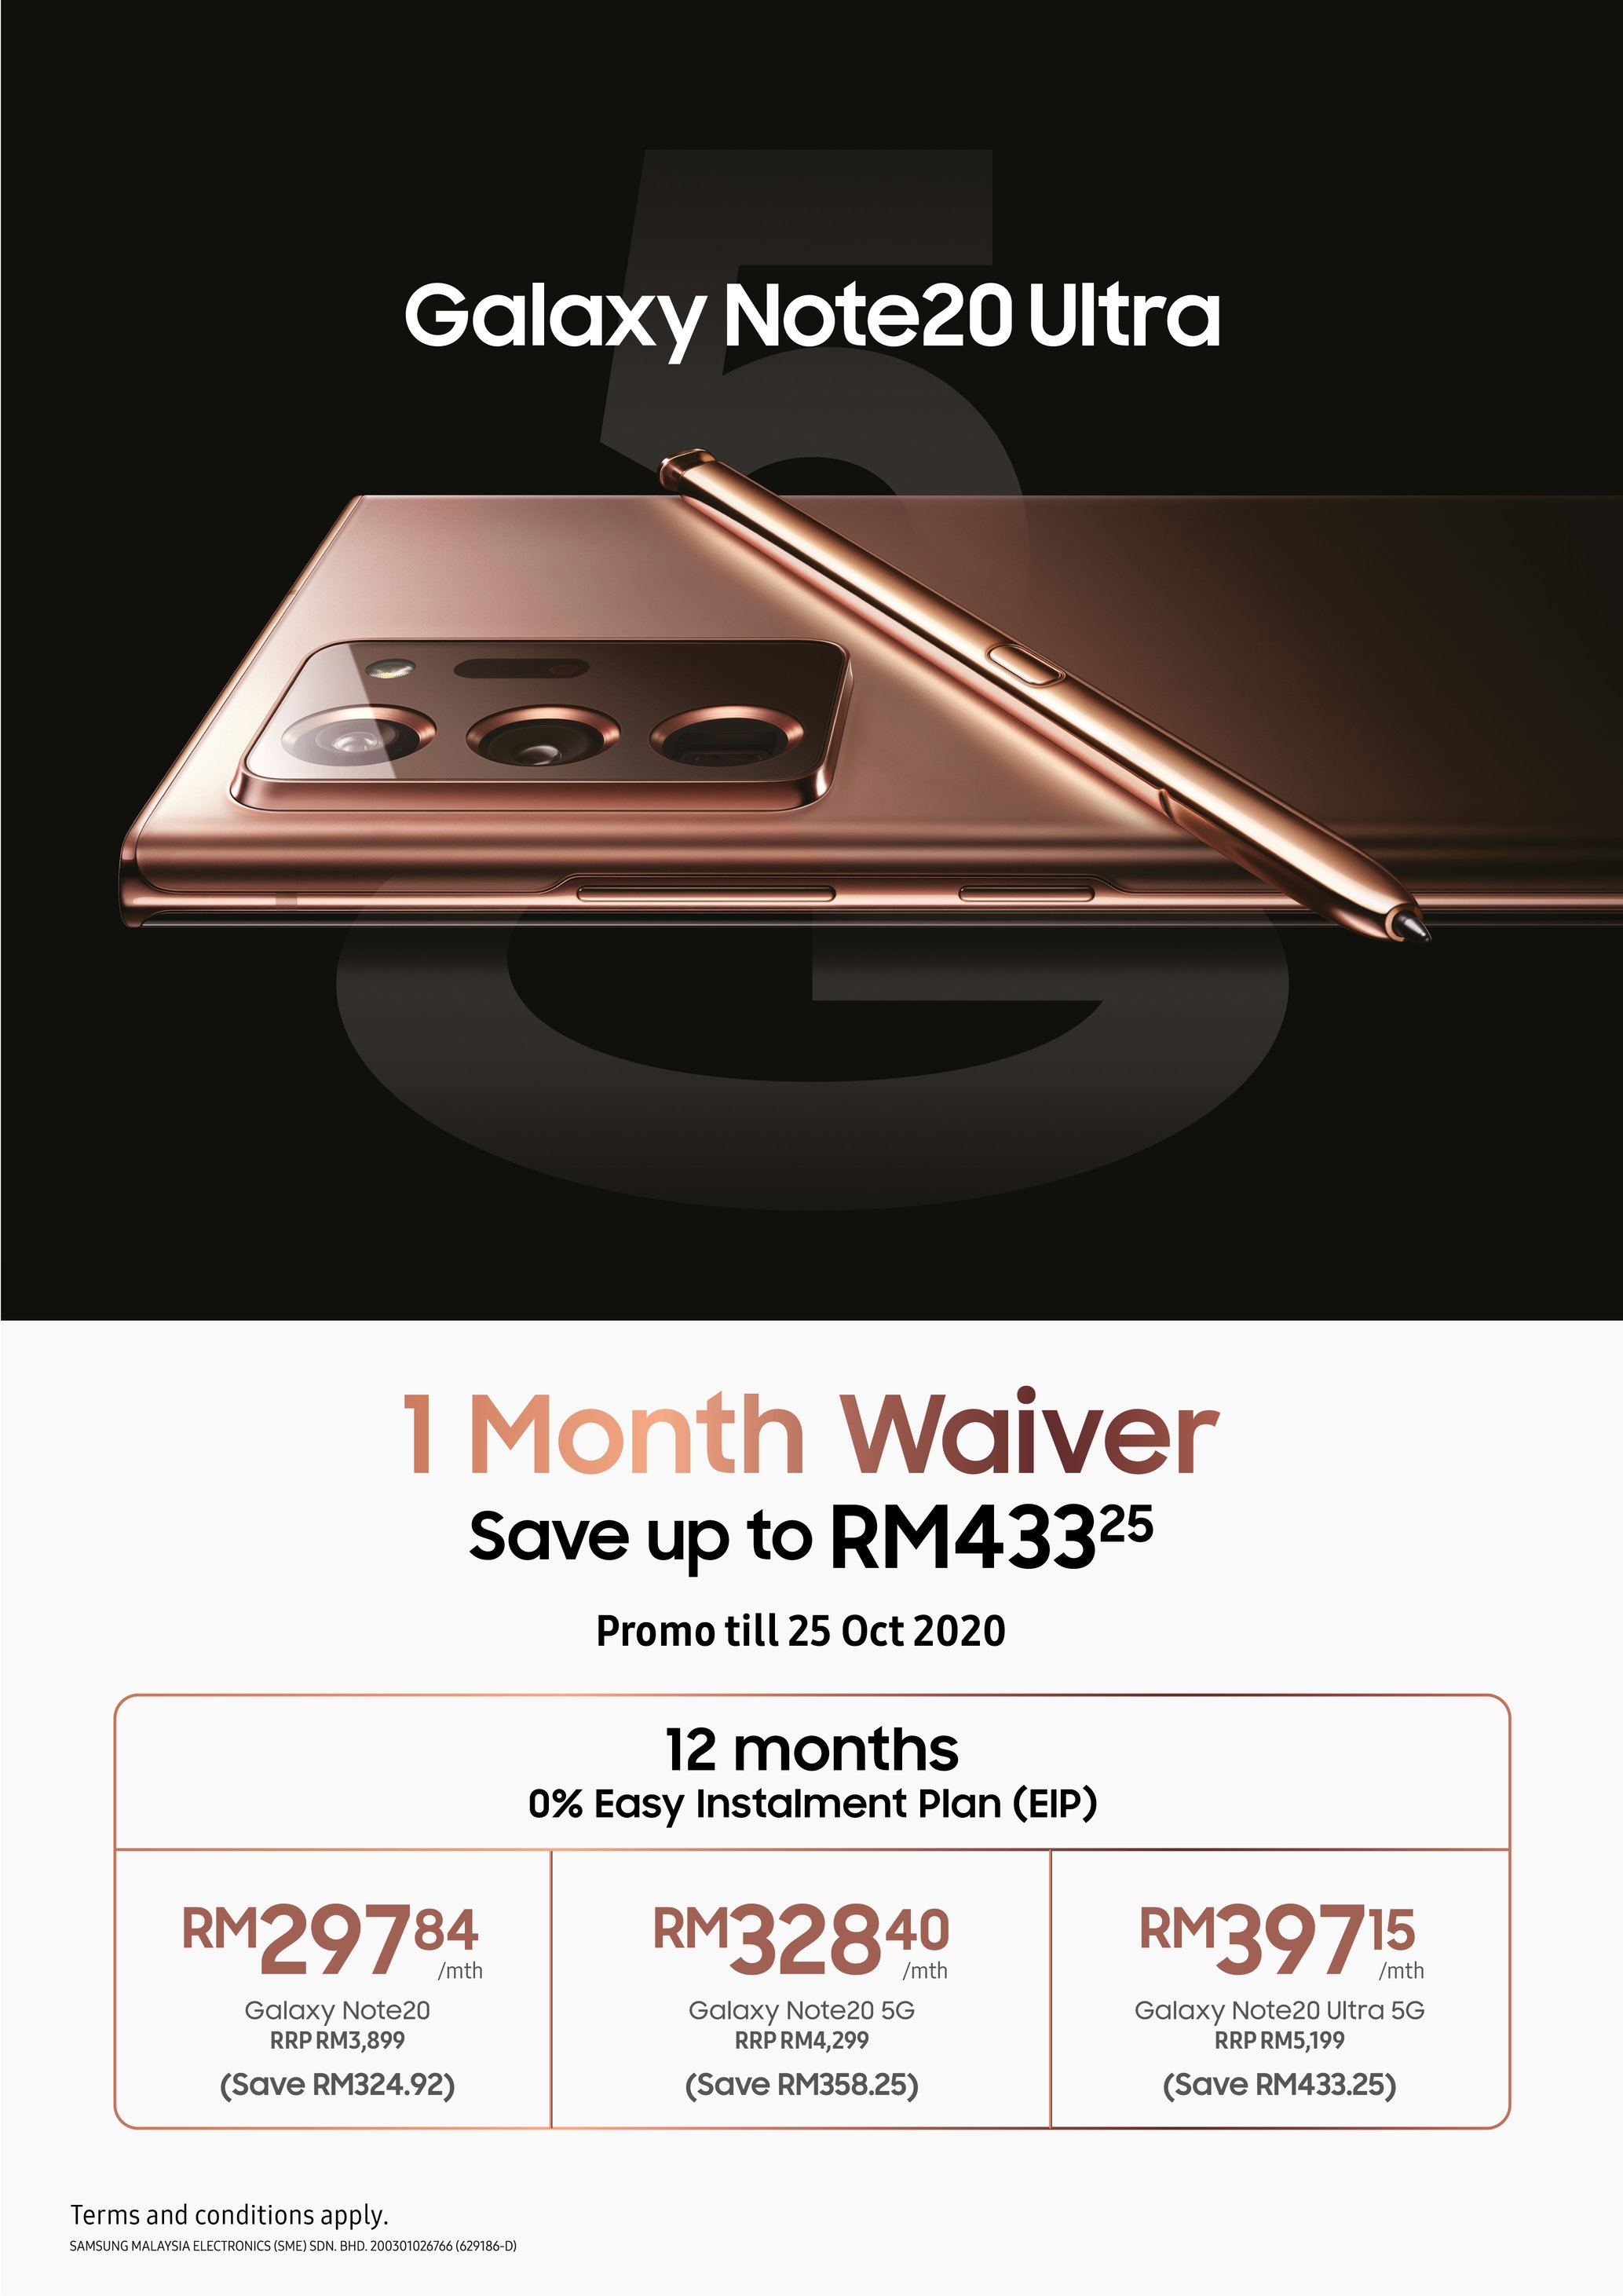 Samsung Galaxy Note 20 Ultra one month waiver